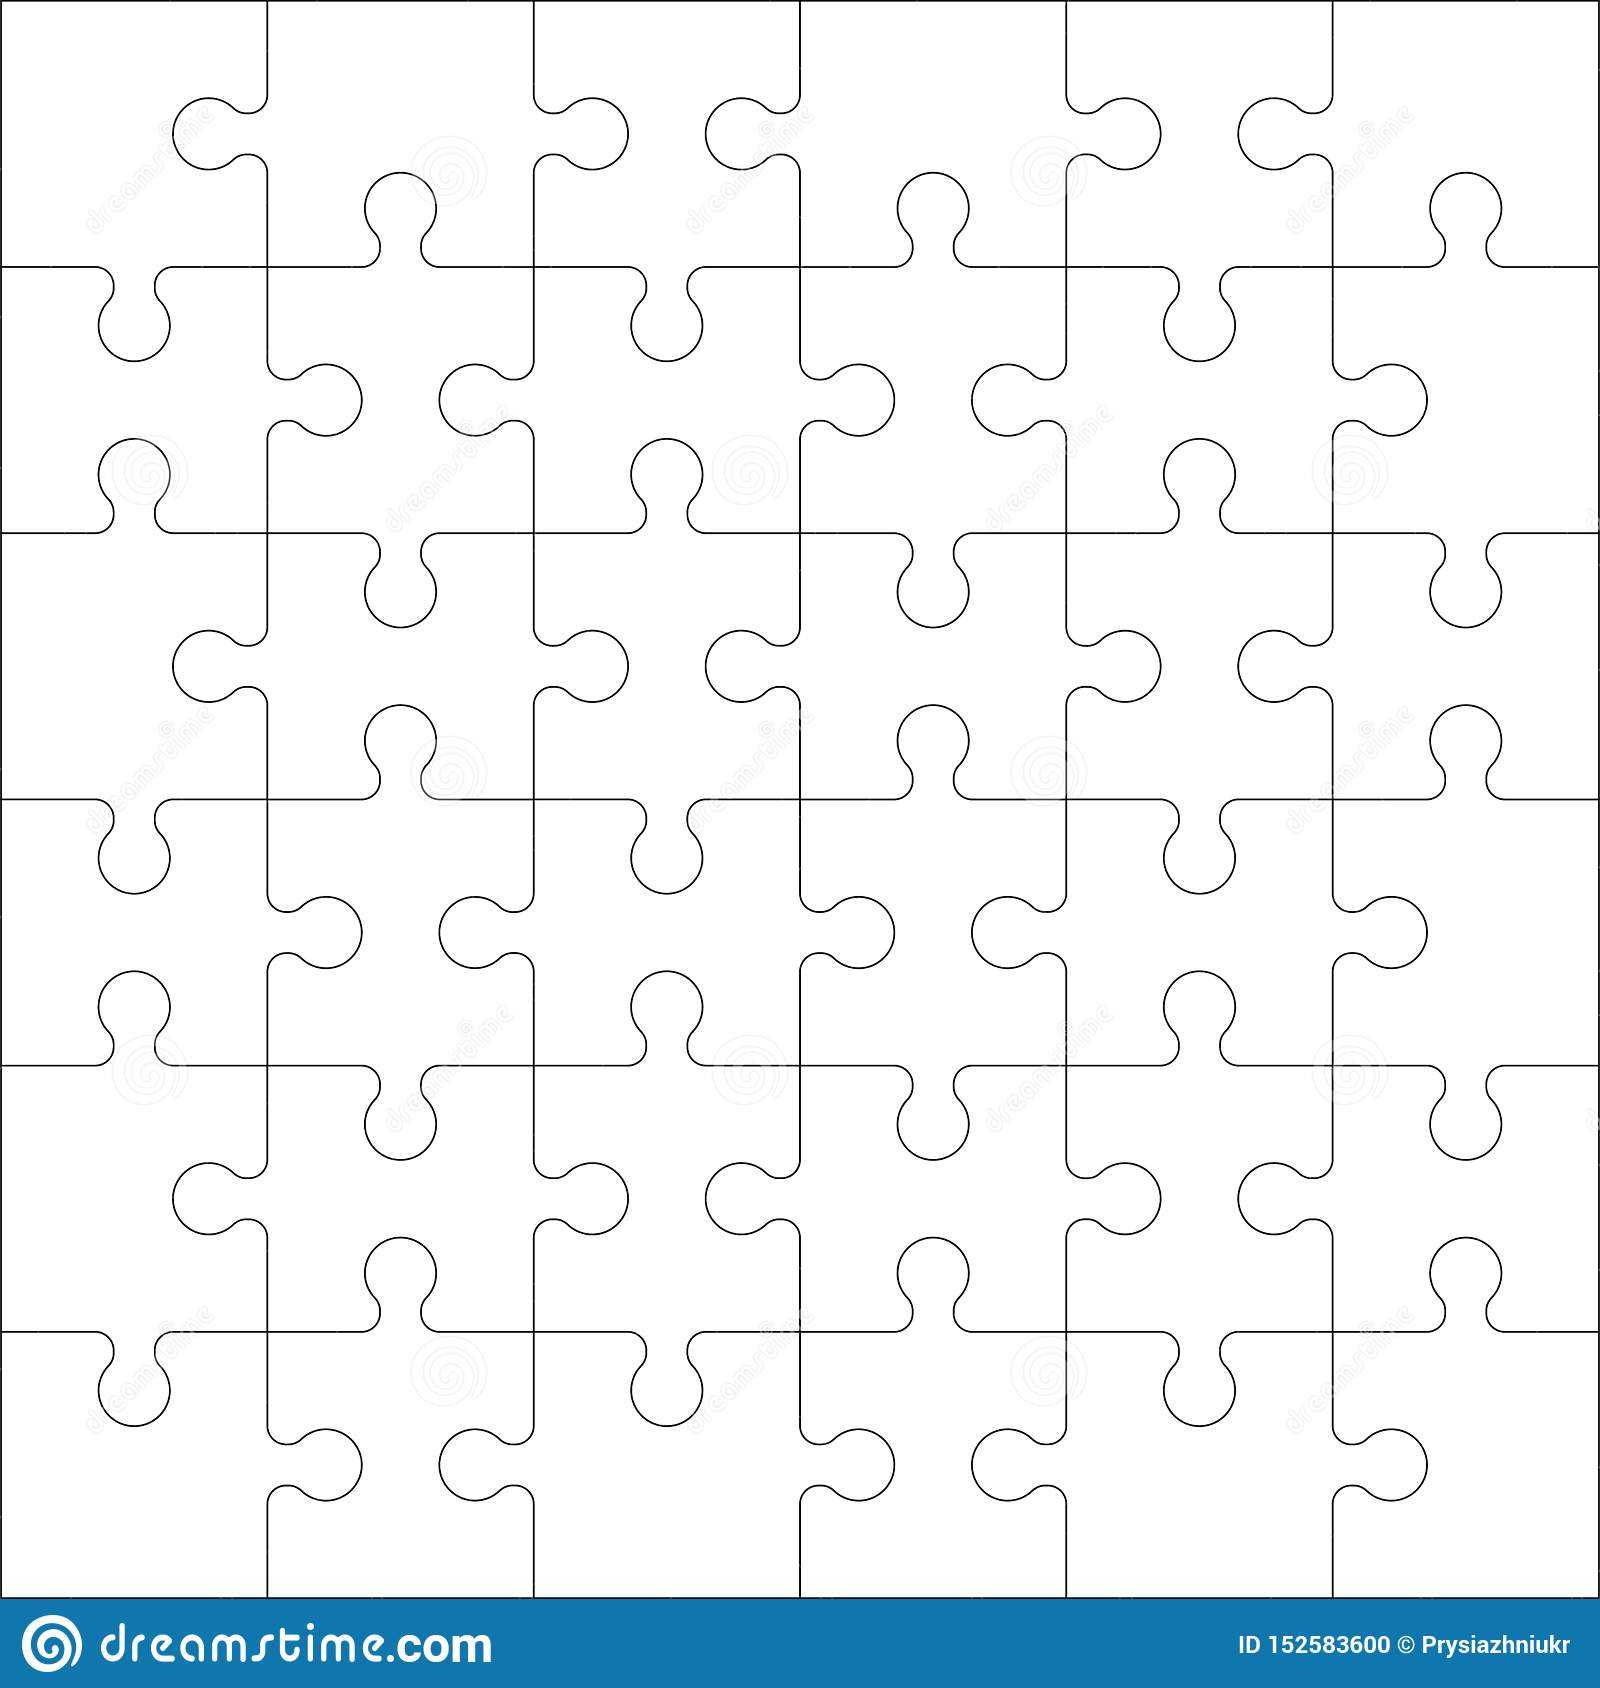 Puzzles Blank Template With Square Grid. Jigsaw Puzzle 6X6 With Regard To Blank Jigsaw Piece Template